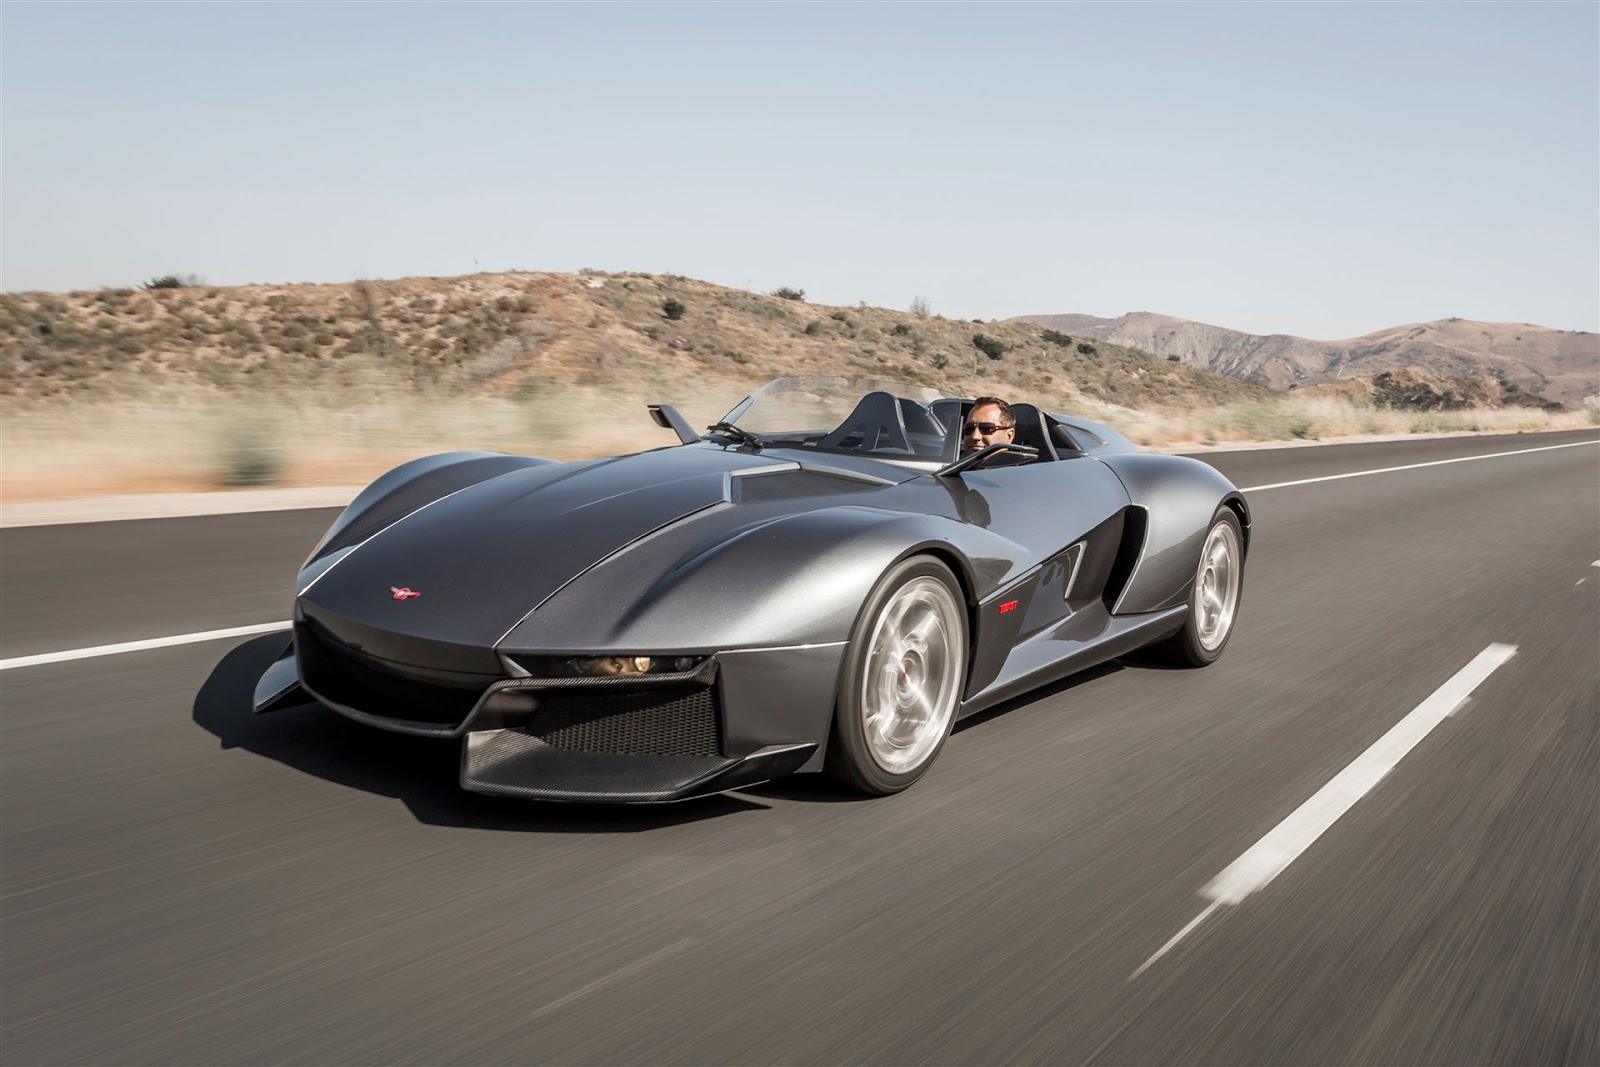 CHRIS BROWN Has A New TOY! He Becomes A Proud OWNER Of A STUNNING REZVANI BEAST 2